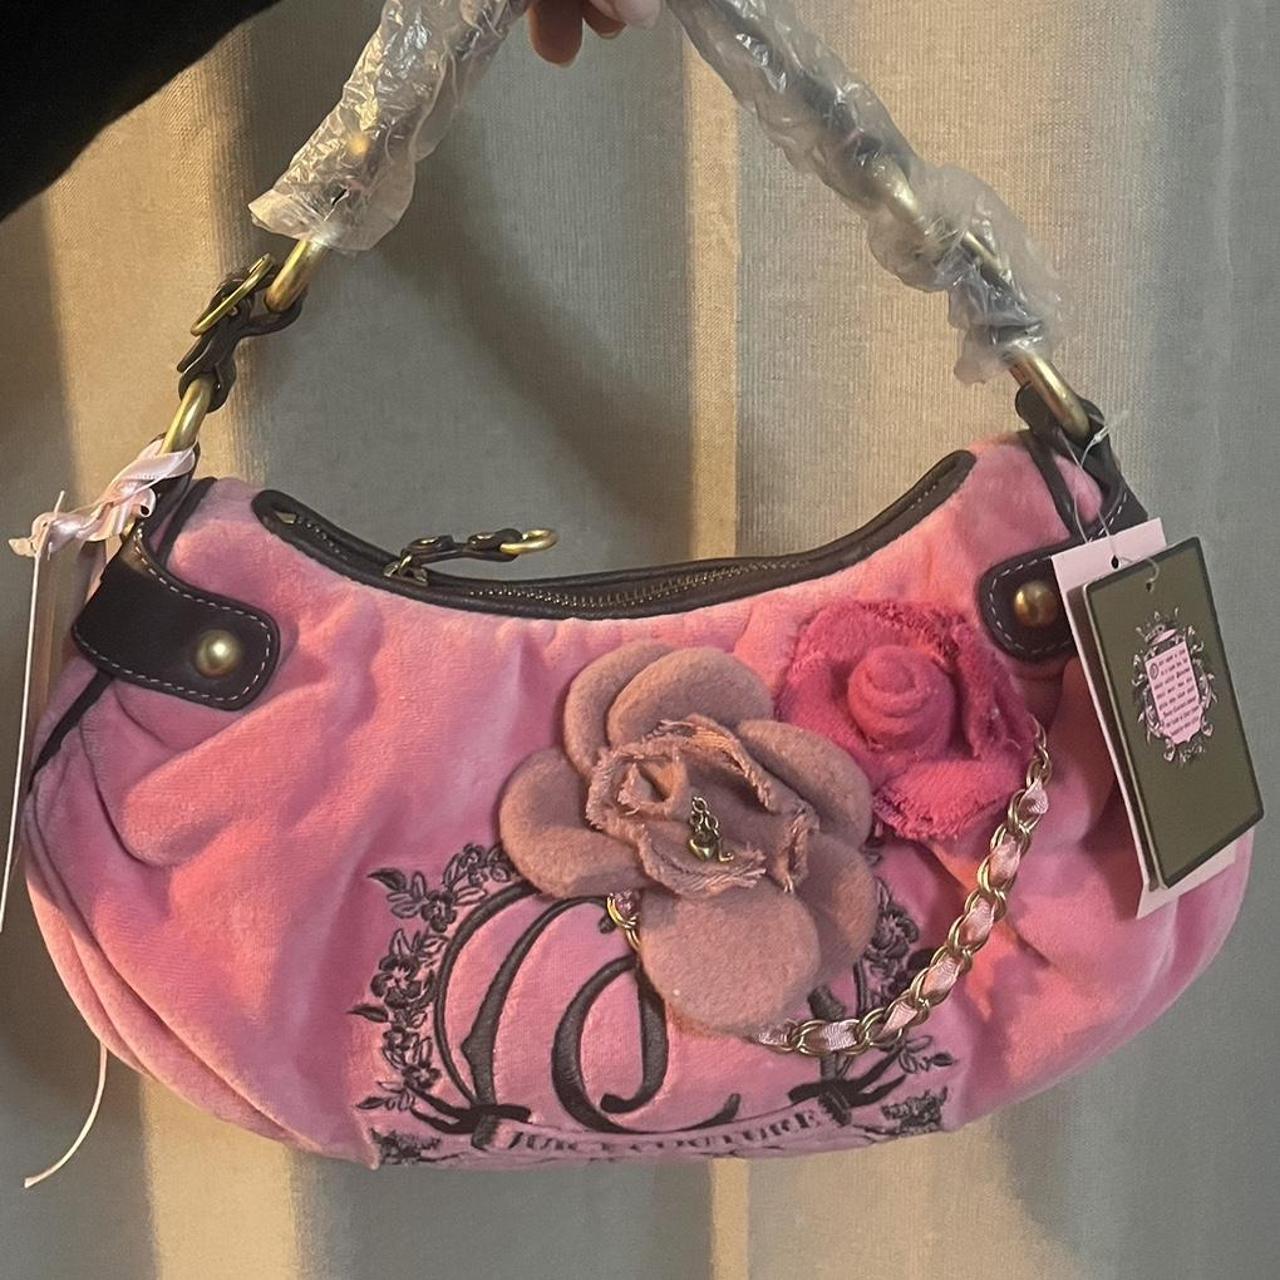 Women's Juicy Couture Bags And Purses, Preowned